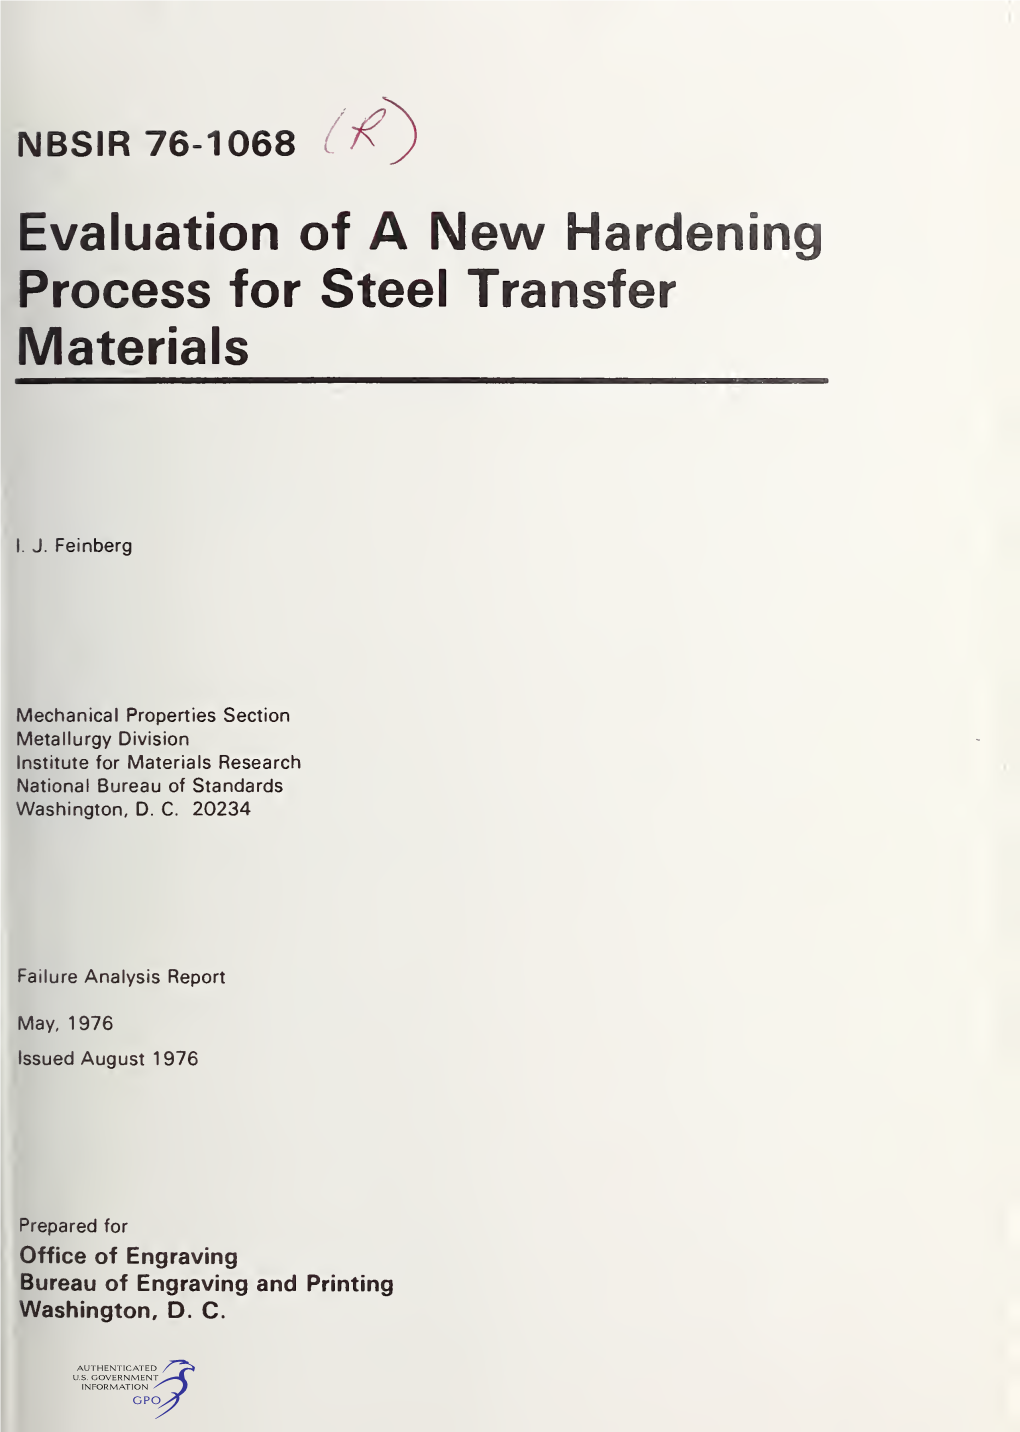 Evaluation of a New Hardening Process for Steel Transfer Materials